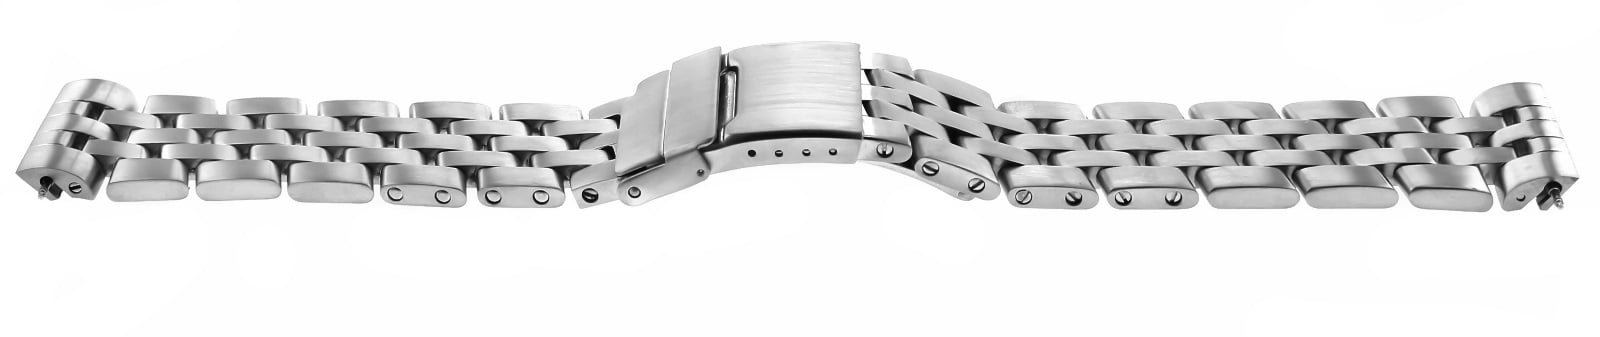 WATCH BAND FOR BREITLING AVENGER A13380 SEAWOLF CHRONOMETER BRACELET 22MM  SHINY | Ewatchparts